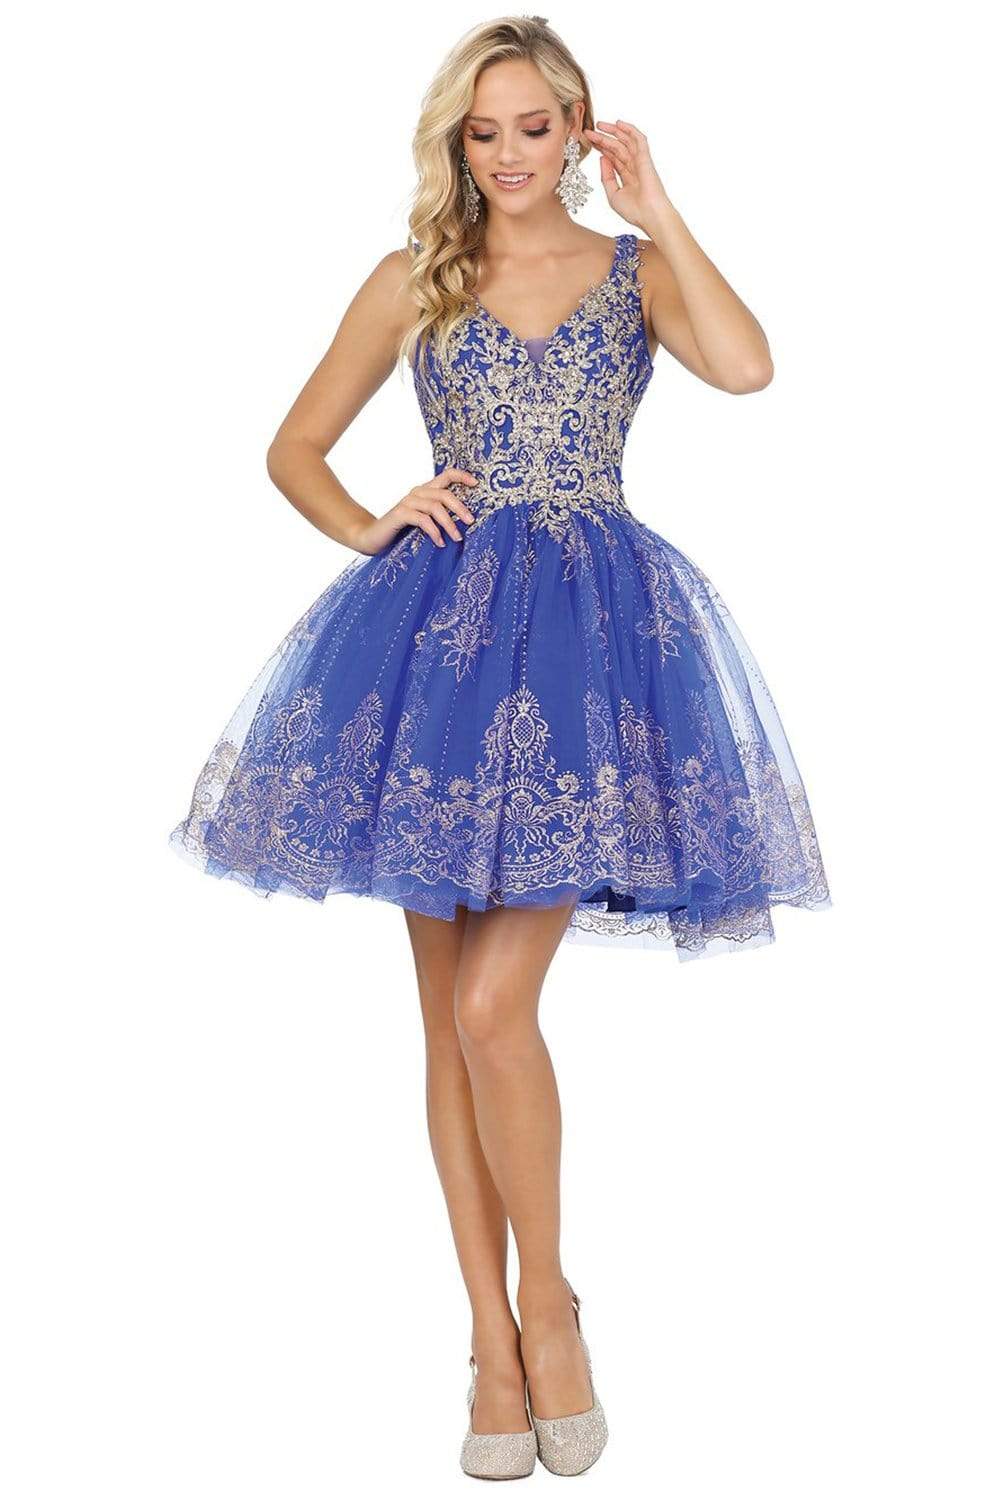 Dancing Queen - 3237 Sleeveless V Neck Lace Applique Cocktail Dress Homecoming Dresses XS / Royal Blue